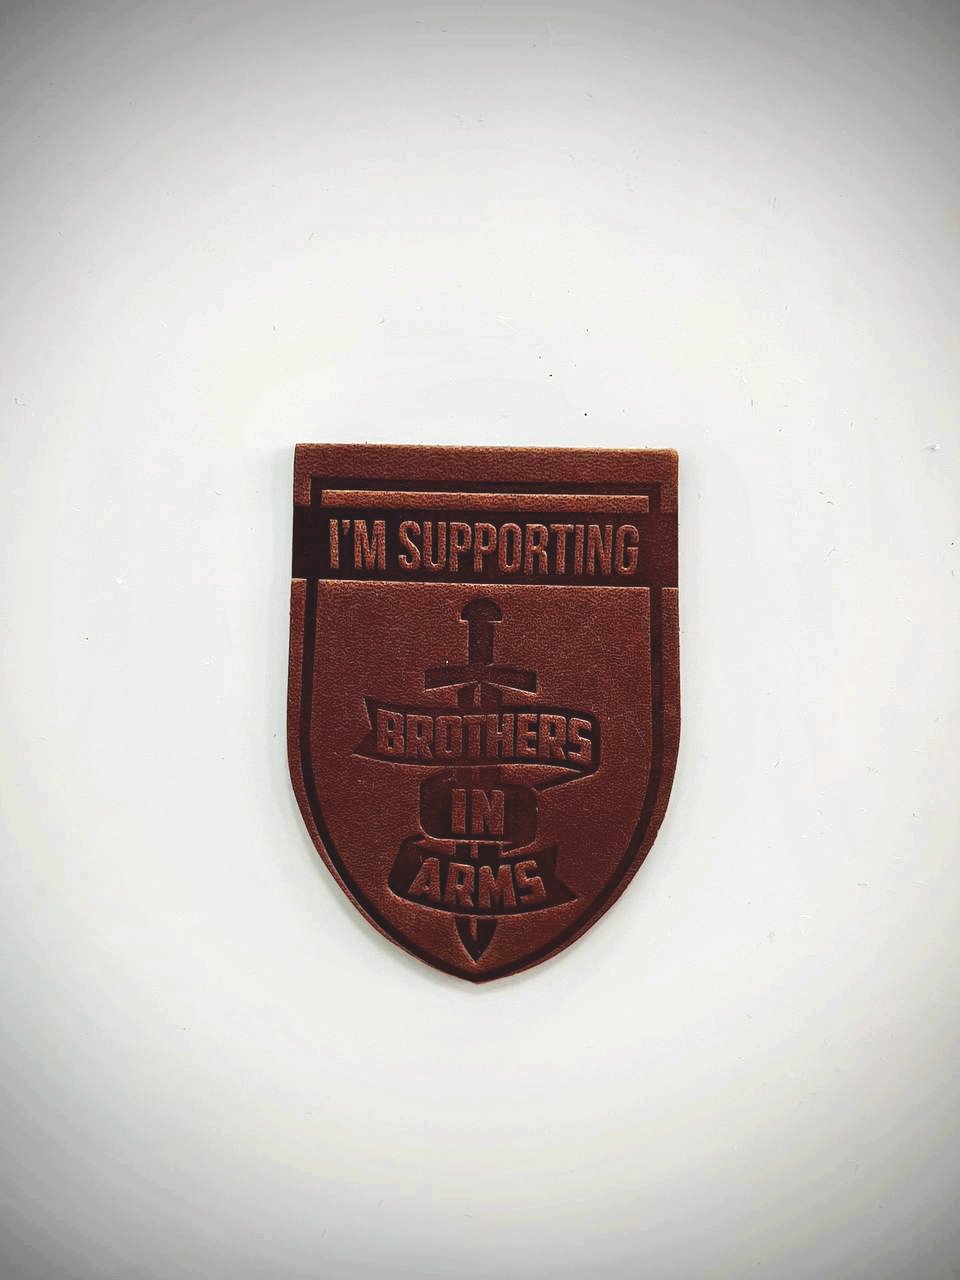 I’m supporting Brothers in arms. Refrigerator Magnet.